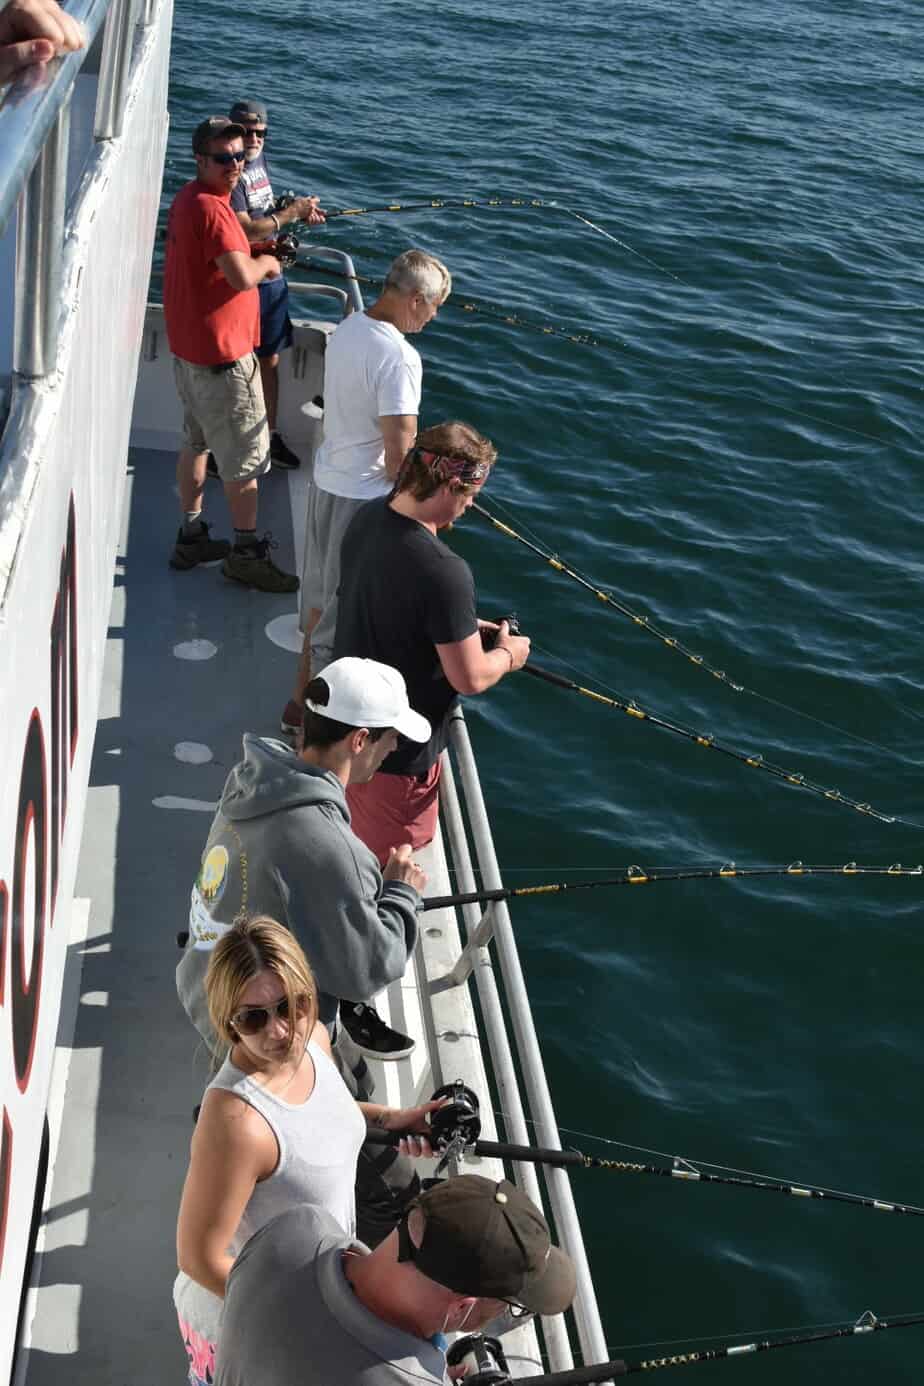 Group photo of team fishing with fishing rods over ocean on boat at Mountainside Treatment Center Extended Care Fishing Event September 2022